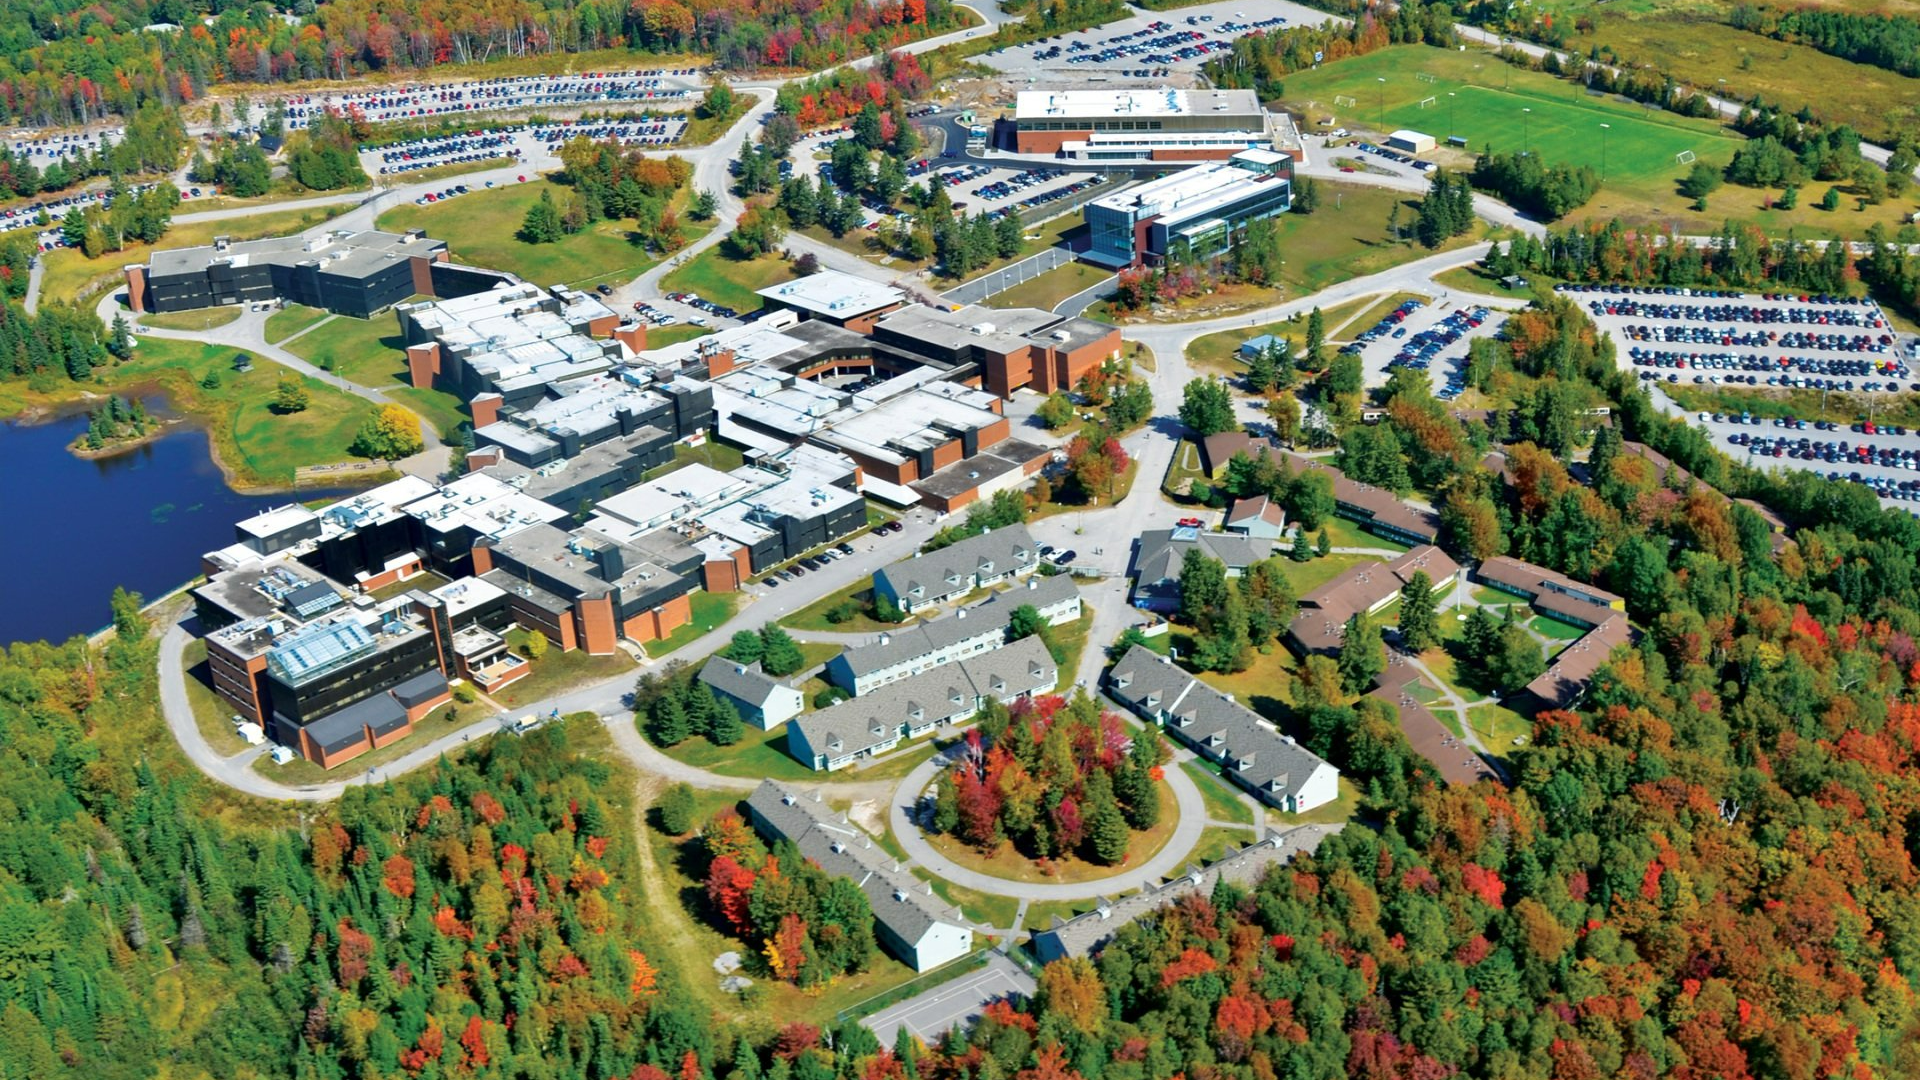 Aerial photograph of campus in the fall